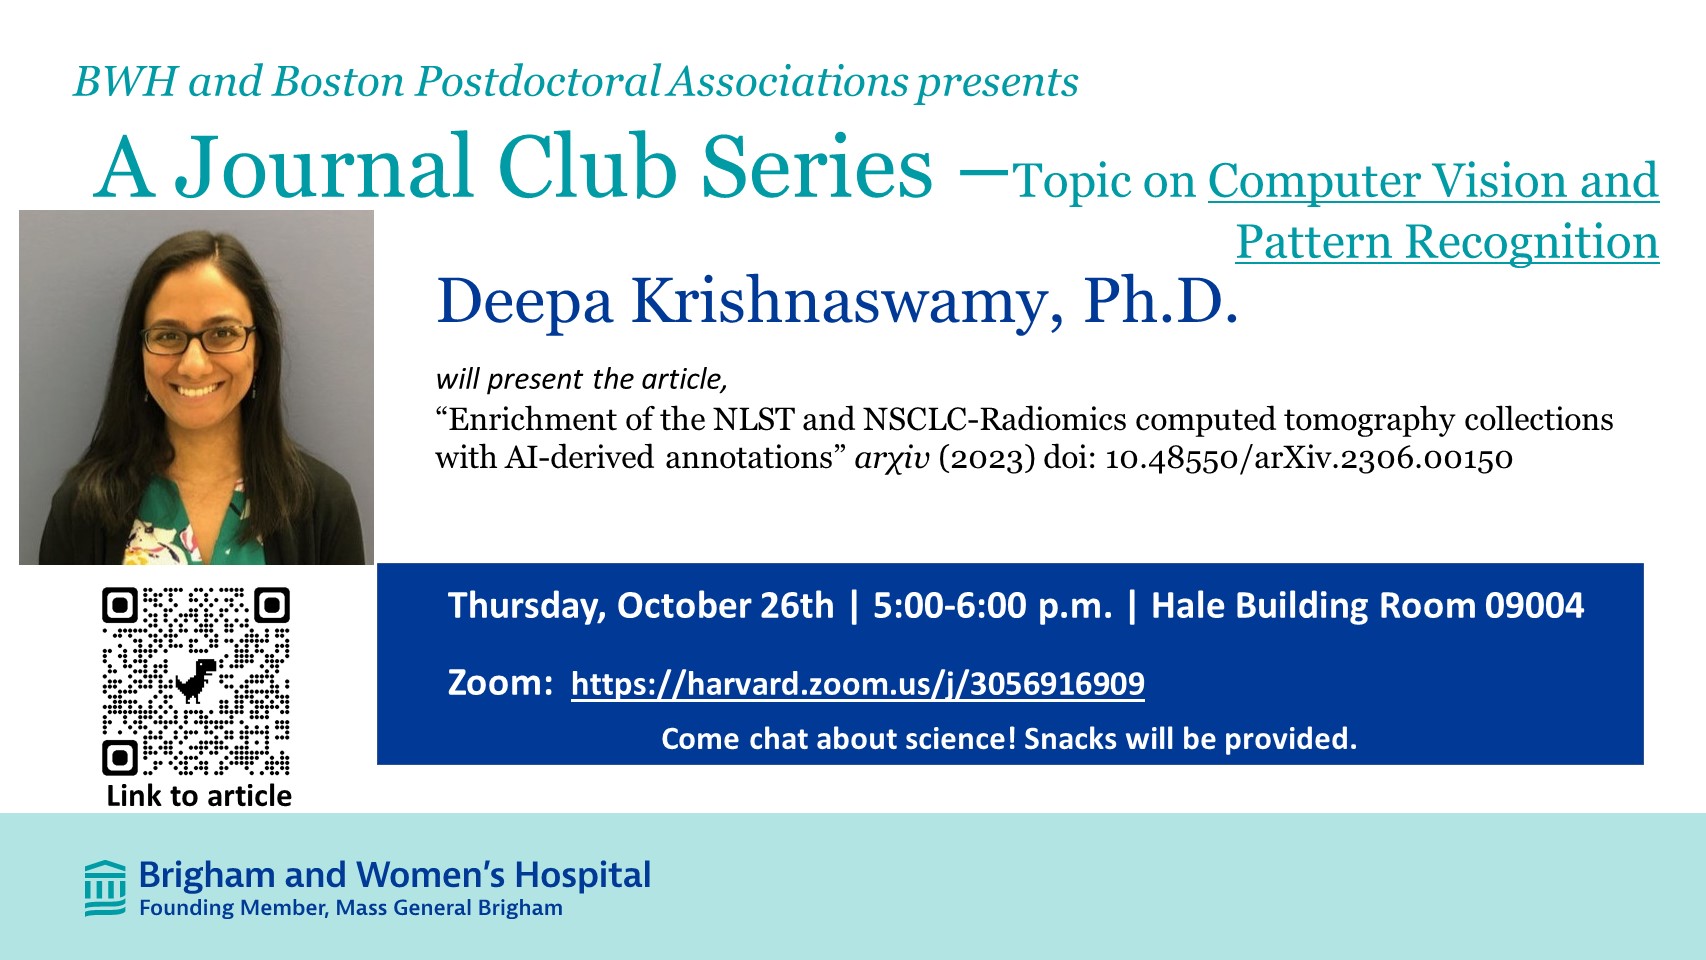 Flyer for October 26, 2023 Postdoc Journal Club featuring Deepa Krishnaswamy presenting on Computer Vision and Pattern Recognition.